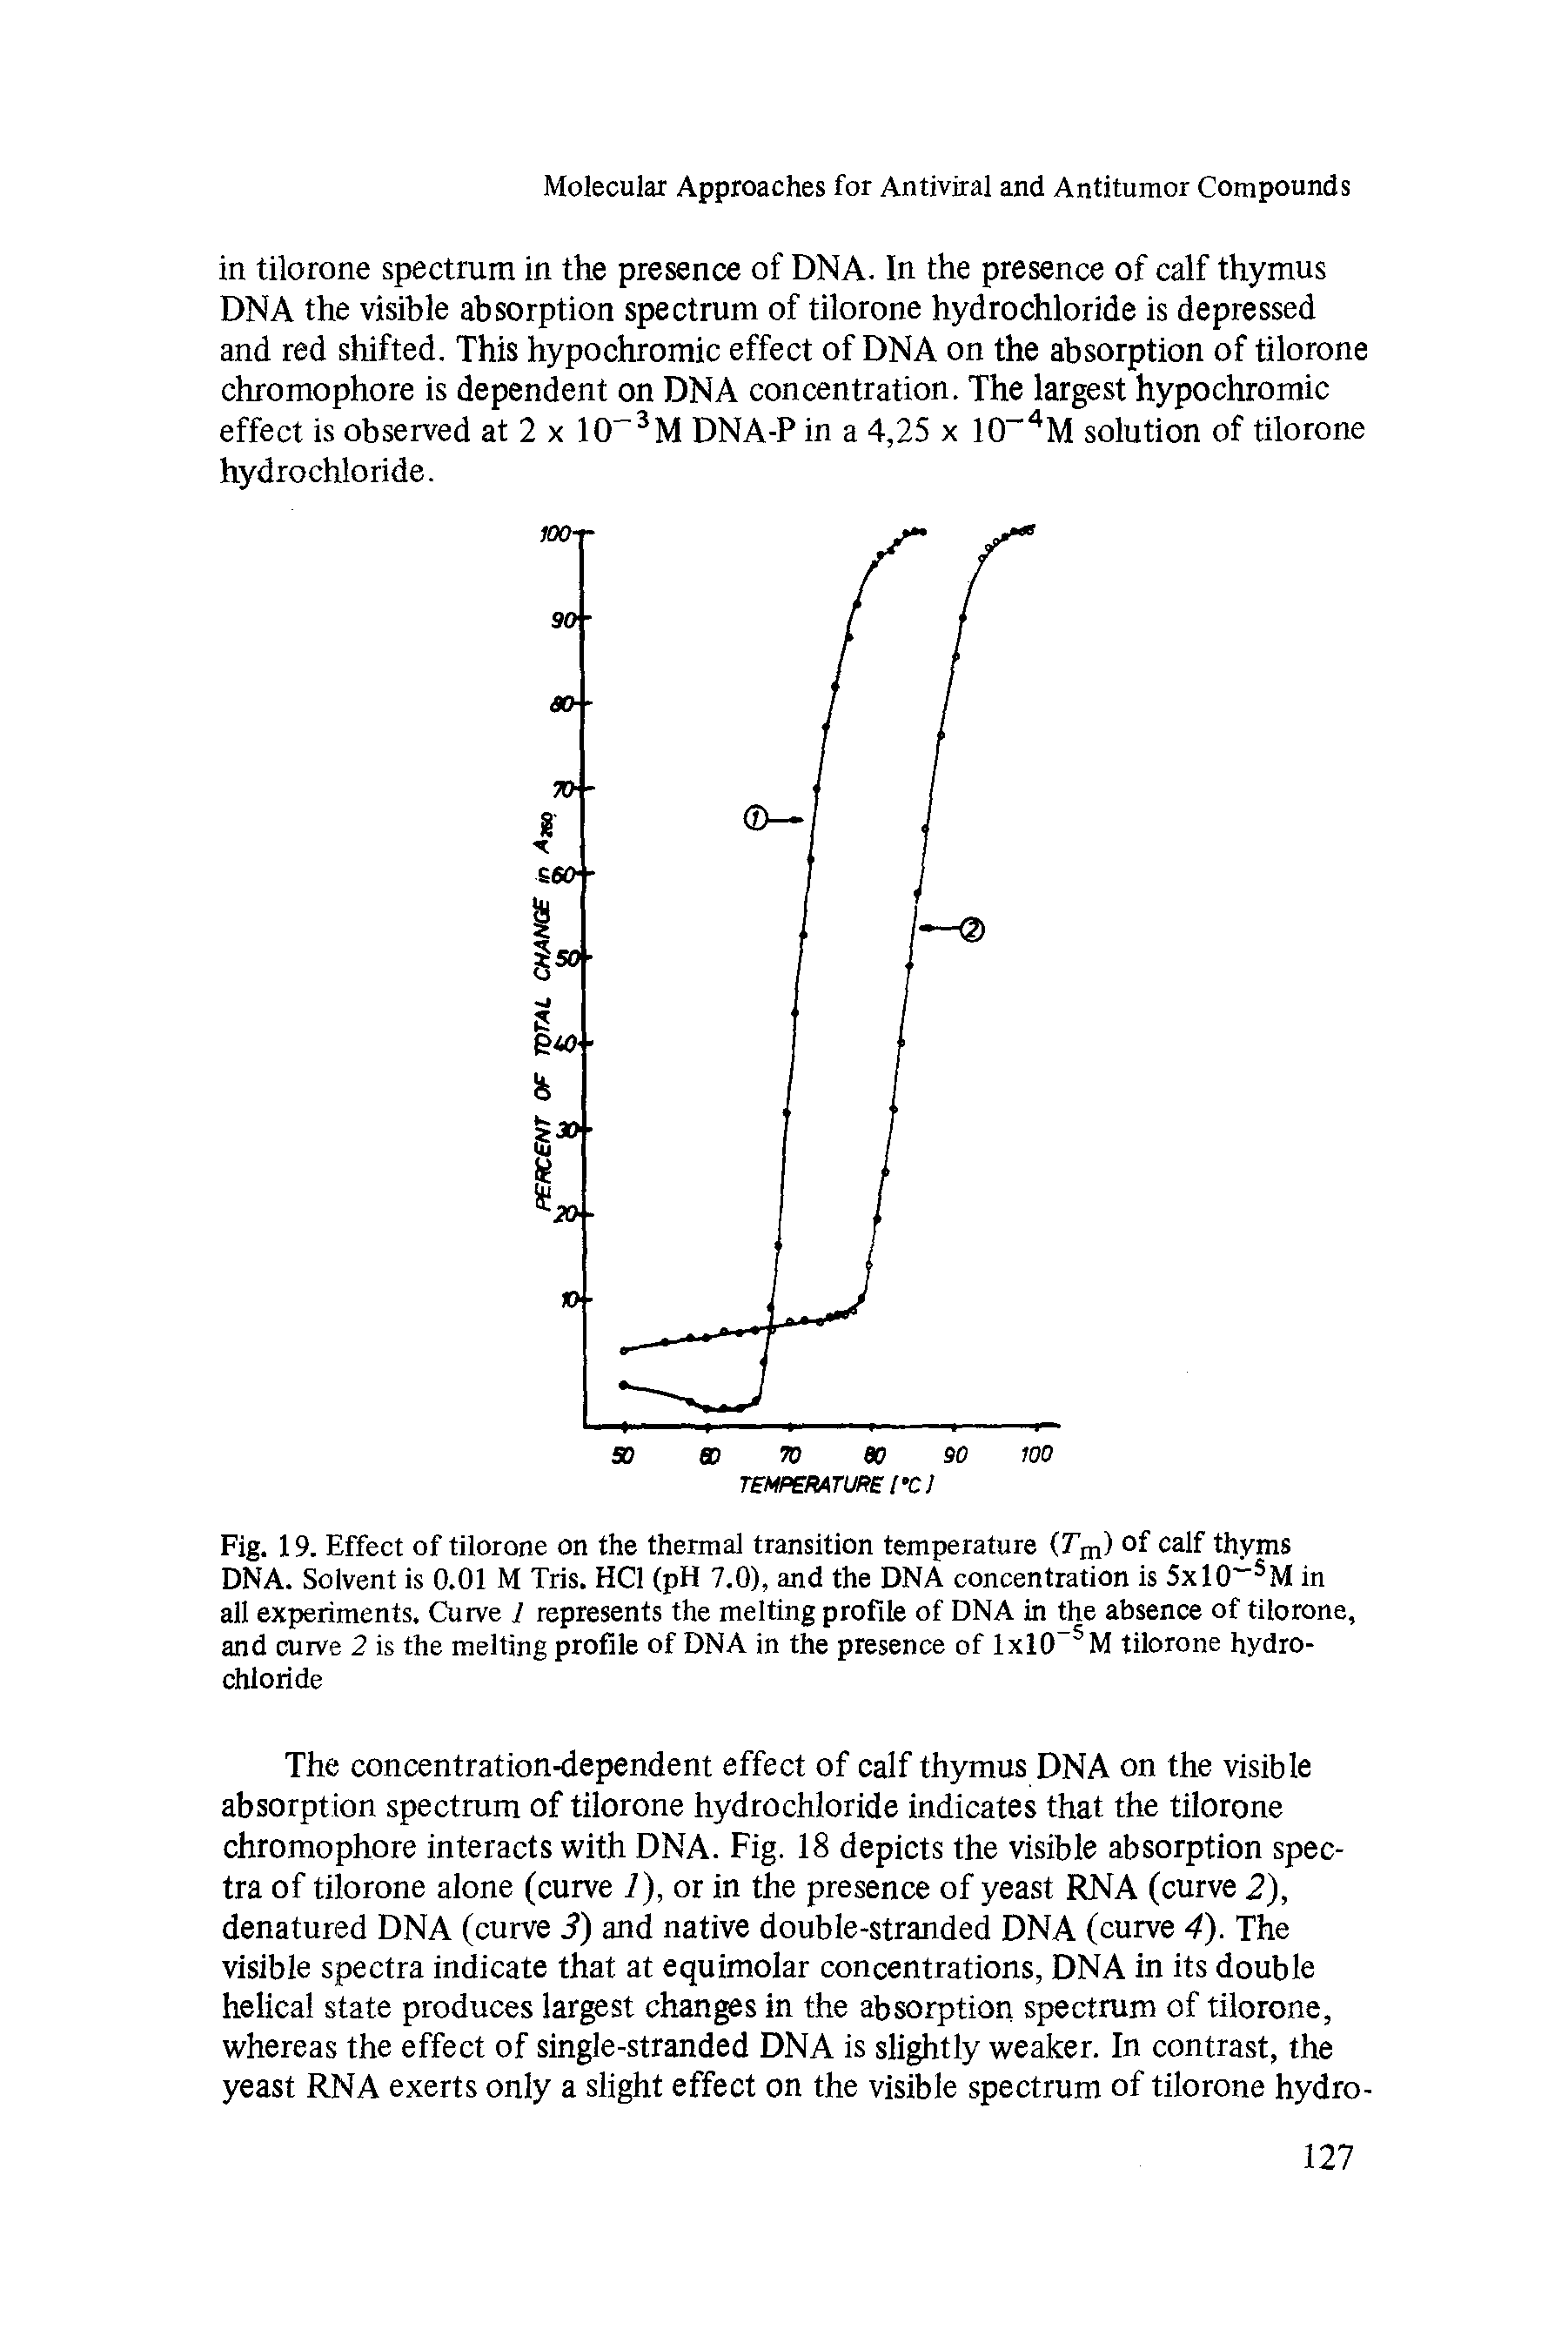 Fig. 19. Effect of tilorone on the thermal transition temperature (Tm) of calf thyms DNA. Solvent is 0.01 M Tris. HC1 (pH 7.0), and the DNA concentration is 5xlO "sM in all experiments. Curve 1 represents the melting profile of DNA in the absence of tilorone, and curve 2 is the melting profile of DNA in the presence of lxlO sM tilorone hydrochloride...